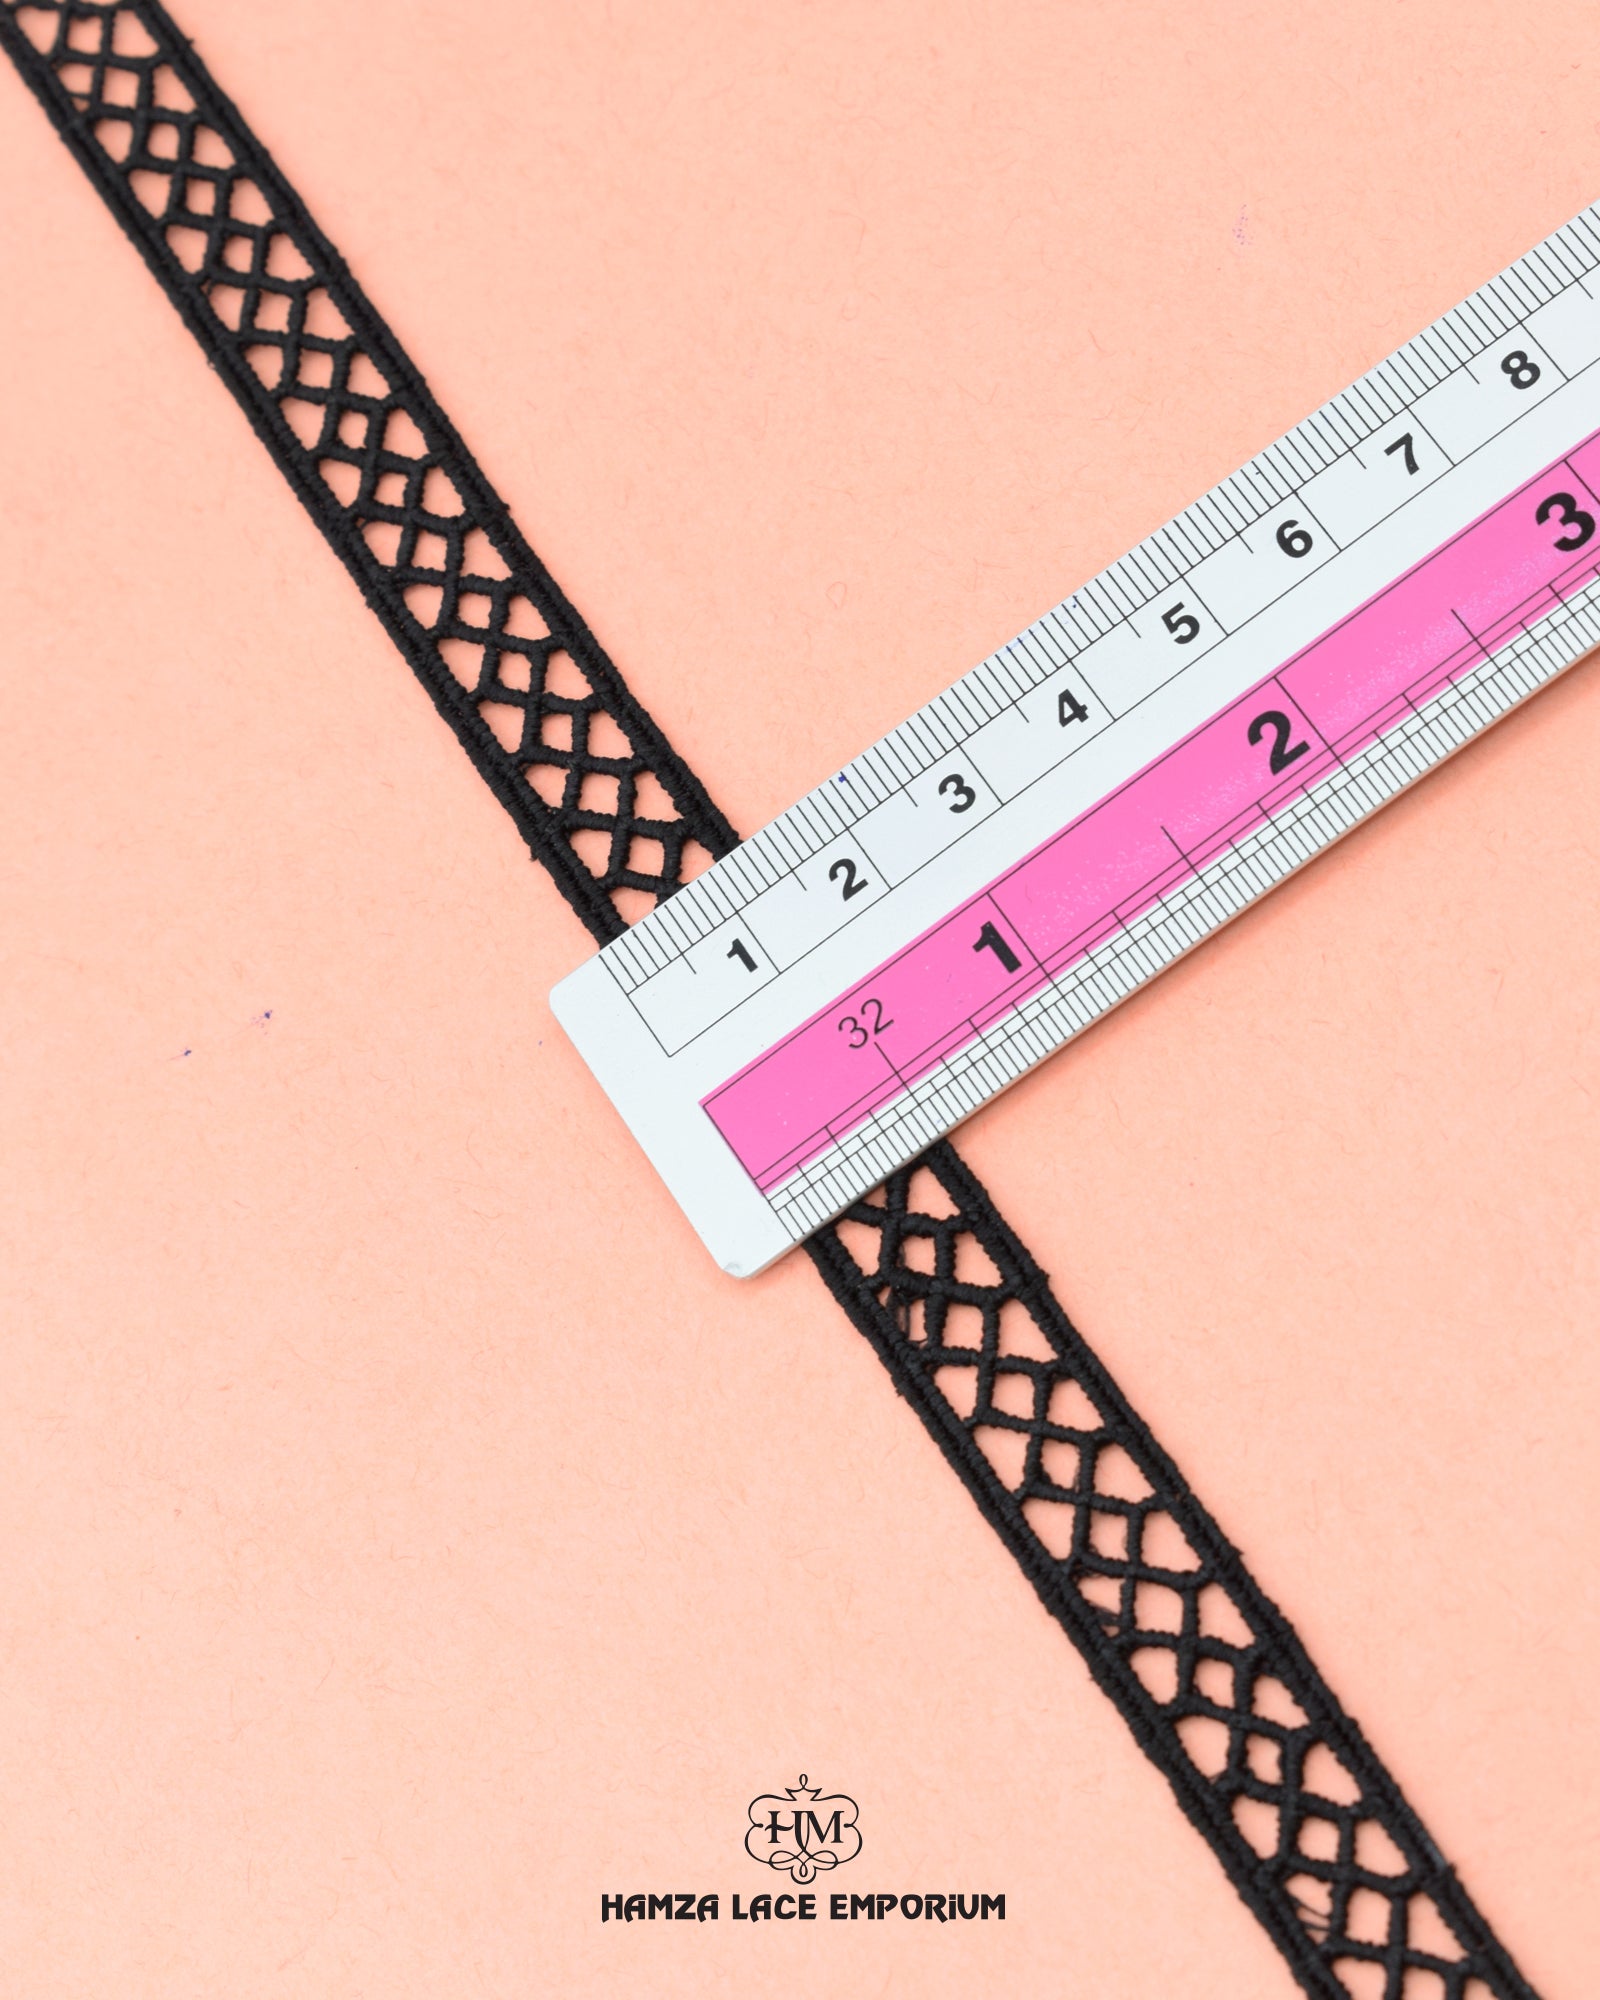 'Center Filling Lace 2081' displayed with a ruler to indicate its width as 0.5 inches.